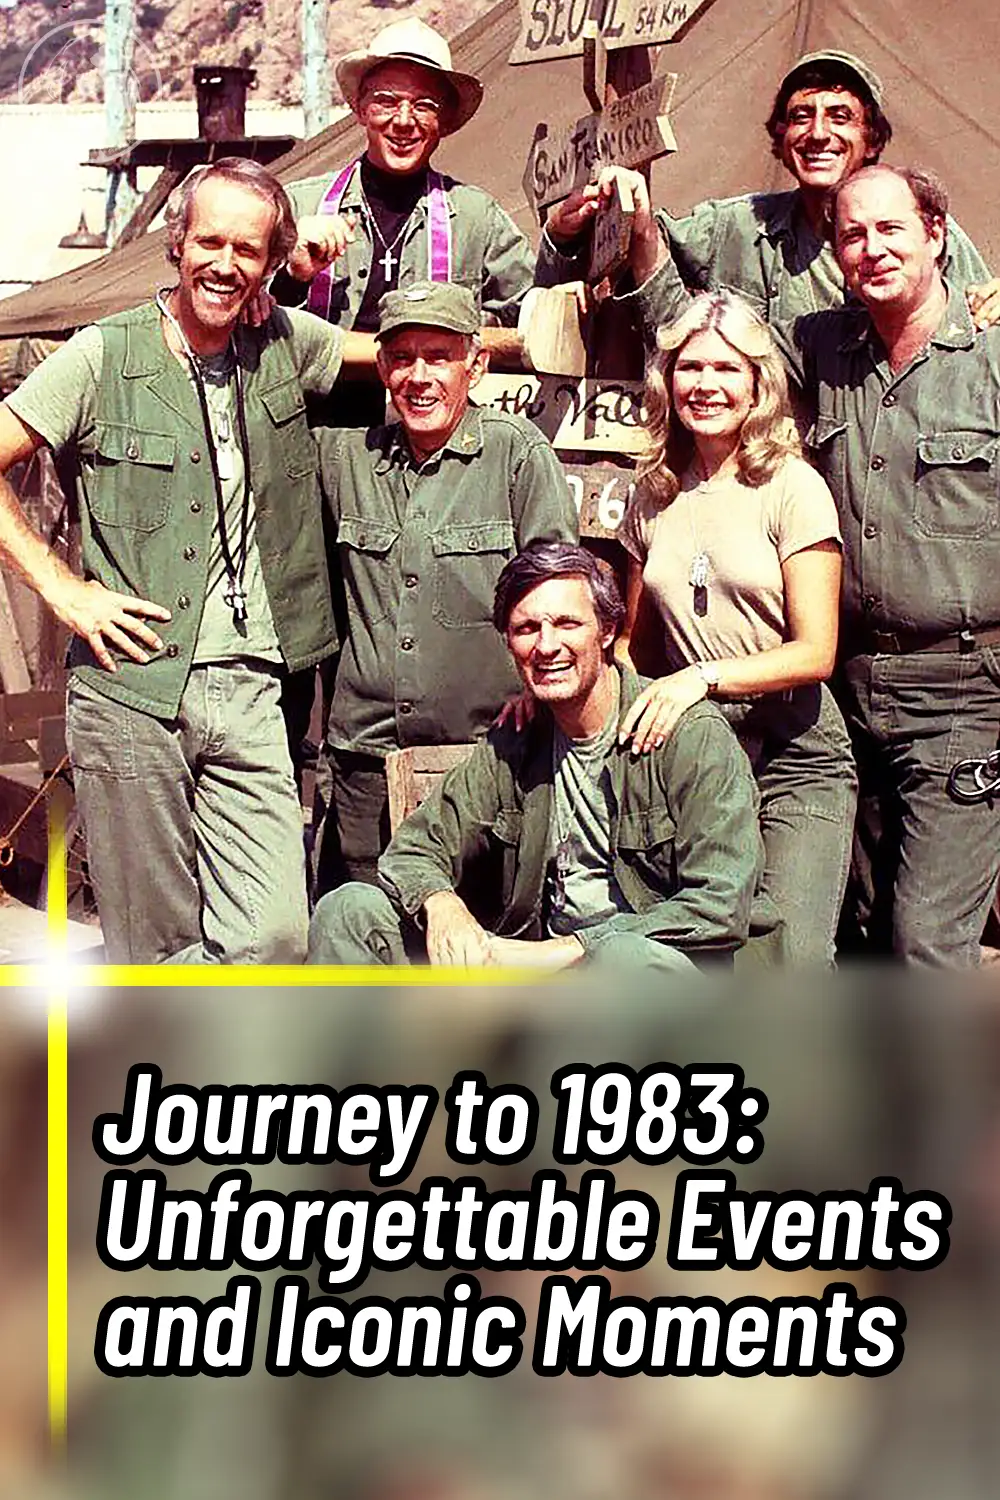 Journey to 1983: Unforgettable Events and Iconic Moments